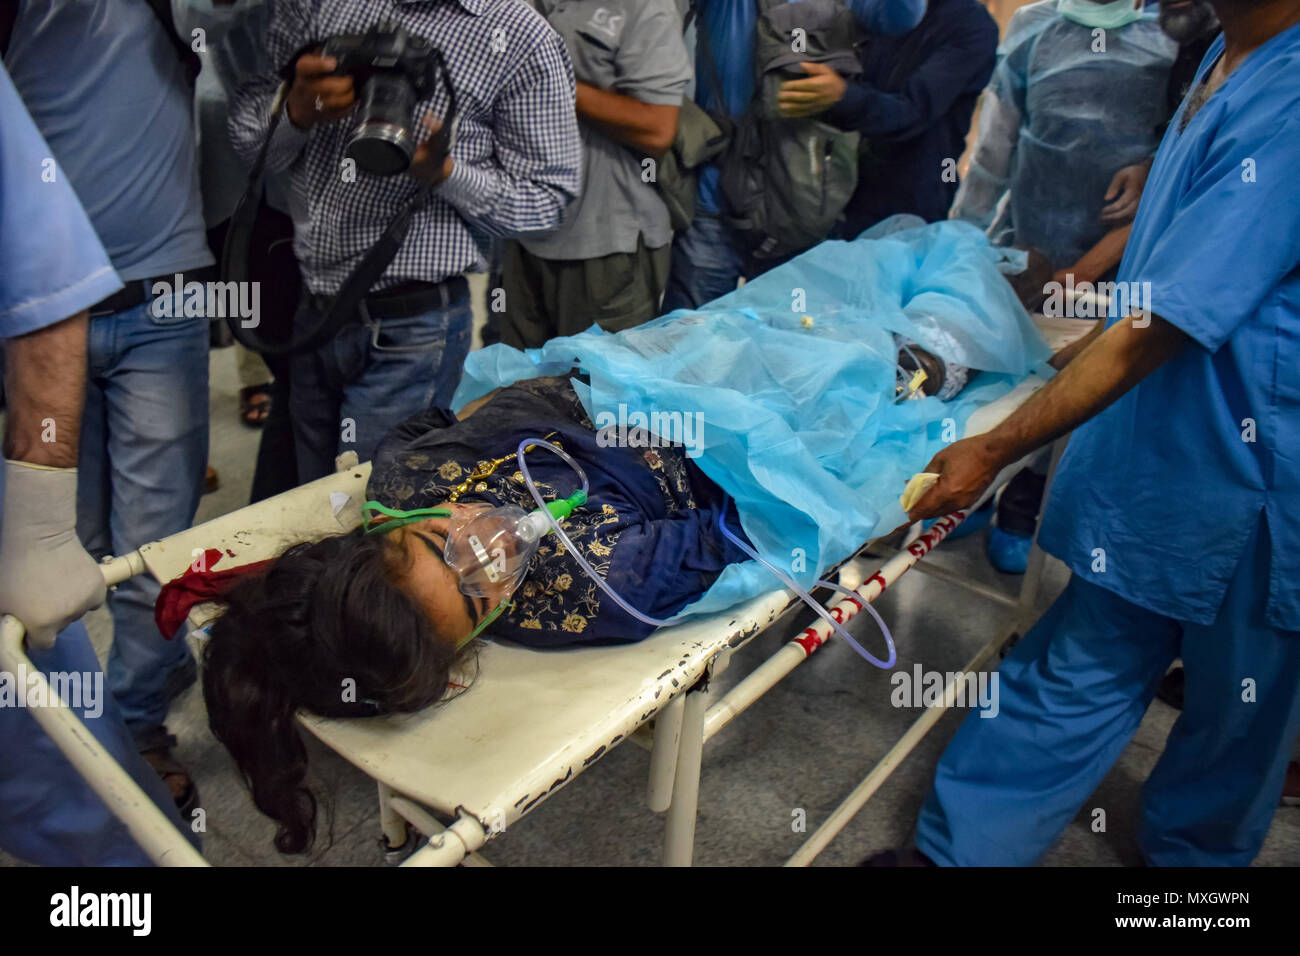 June 4, 2018 - Srinagar, Jammu & Kashmir, India - (EDITORS NOTE: Image contains graphic content) Kashmiris carry 13-year-old Nadia, who was injured in an explosion, on a stretcher for treatment at a local hospital in Srinagar, Indian Kashmir on Monday. A grenade exploded on a busy road in the southern town of Shopian in Indian-controlled Kashmir wounding at least 12 civilians and four policemen on Monday, police said. Credit: Abbas Idrees/SOPA Images/ZUMA Wire/Alamy Live News Stock Photo